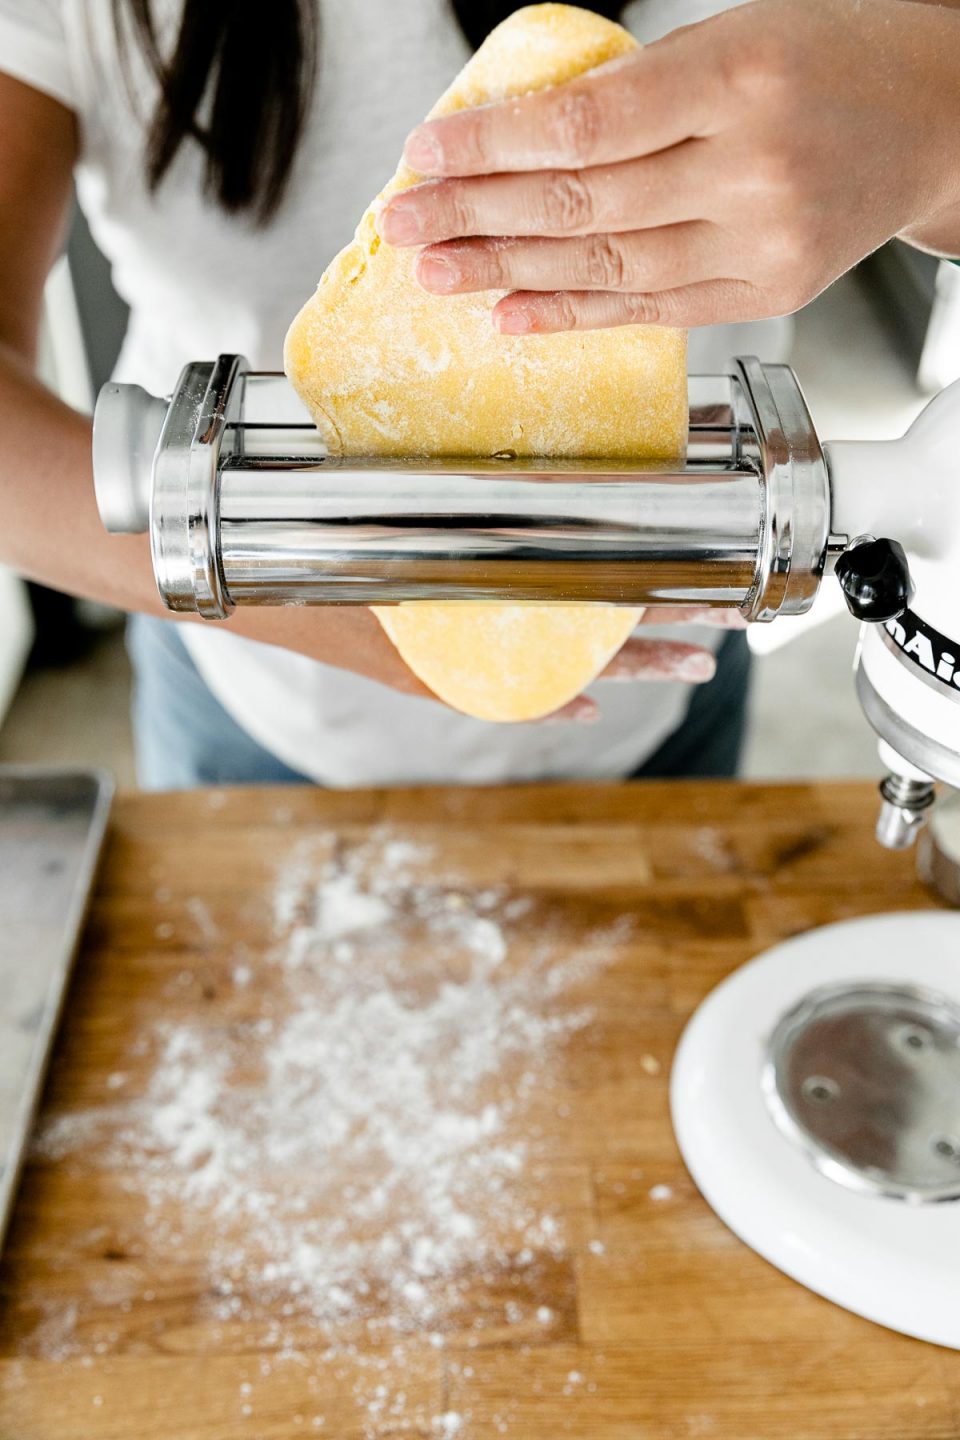 Jess of Plays Well With Butter uses her hands to feed a piece of homemade pasta dough through a pasta roller attachment connected to a KitchenAid Stand Mixer. The Stand Mixer rests atop a butcher block countertop. The countertop has been lightly dusted with flour and an aluminum baking sheet also sits on top of the countertop.